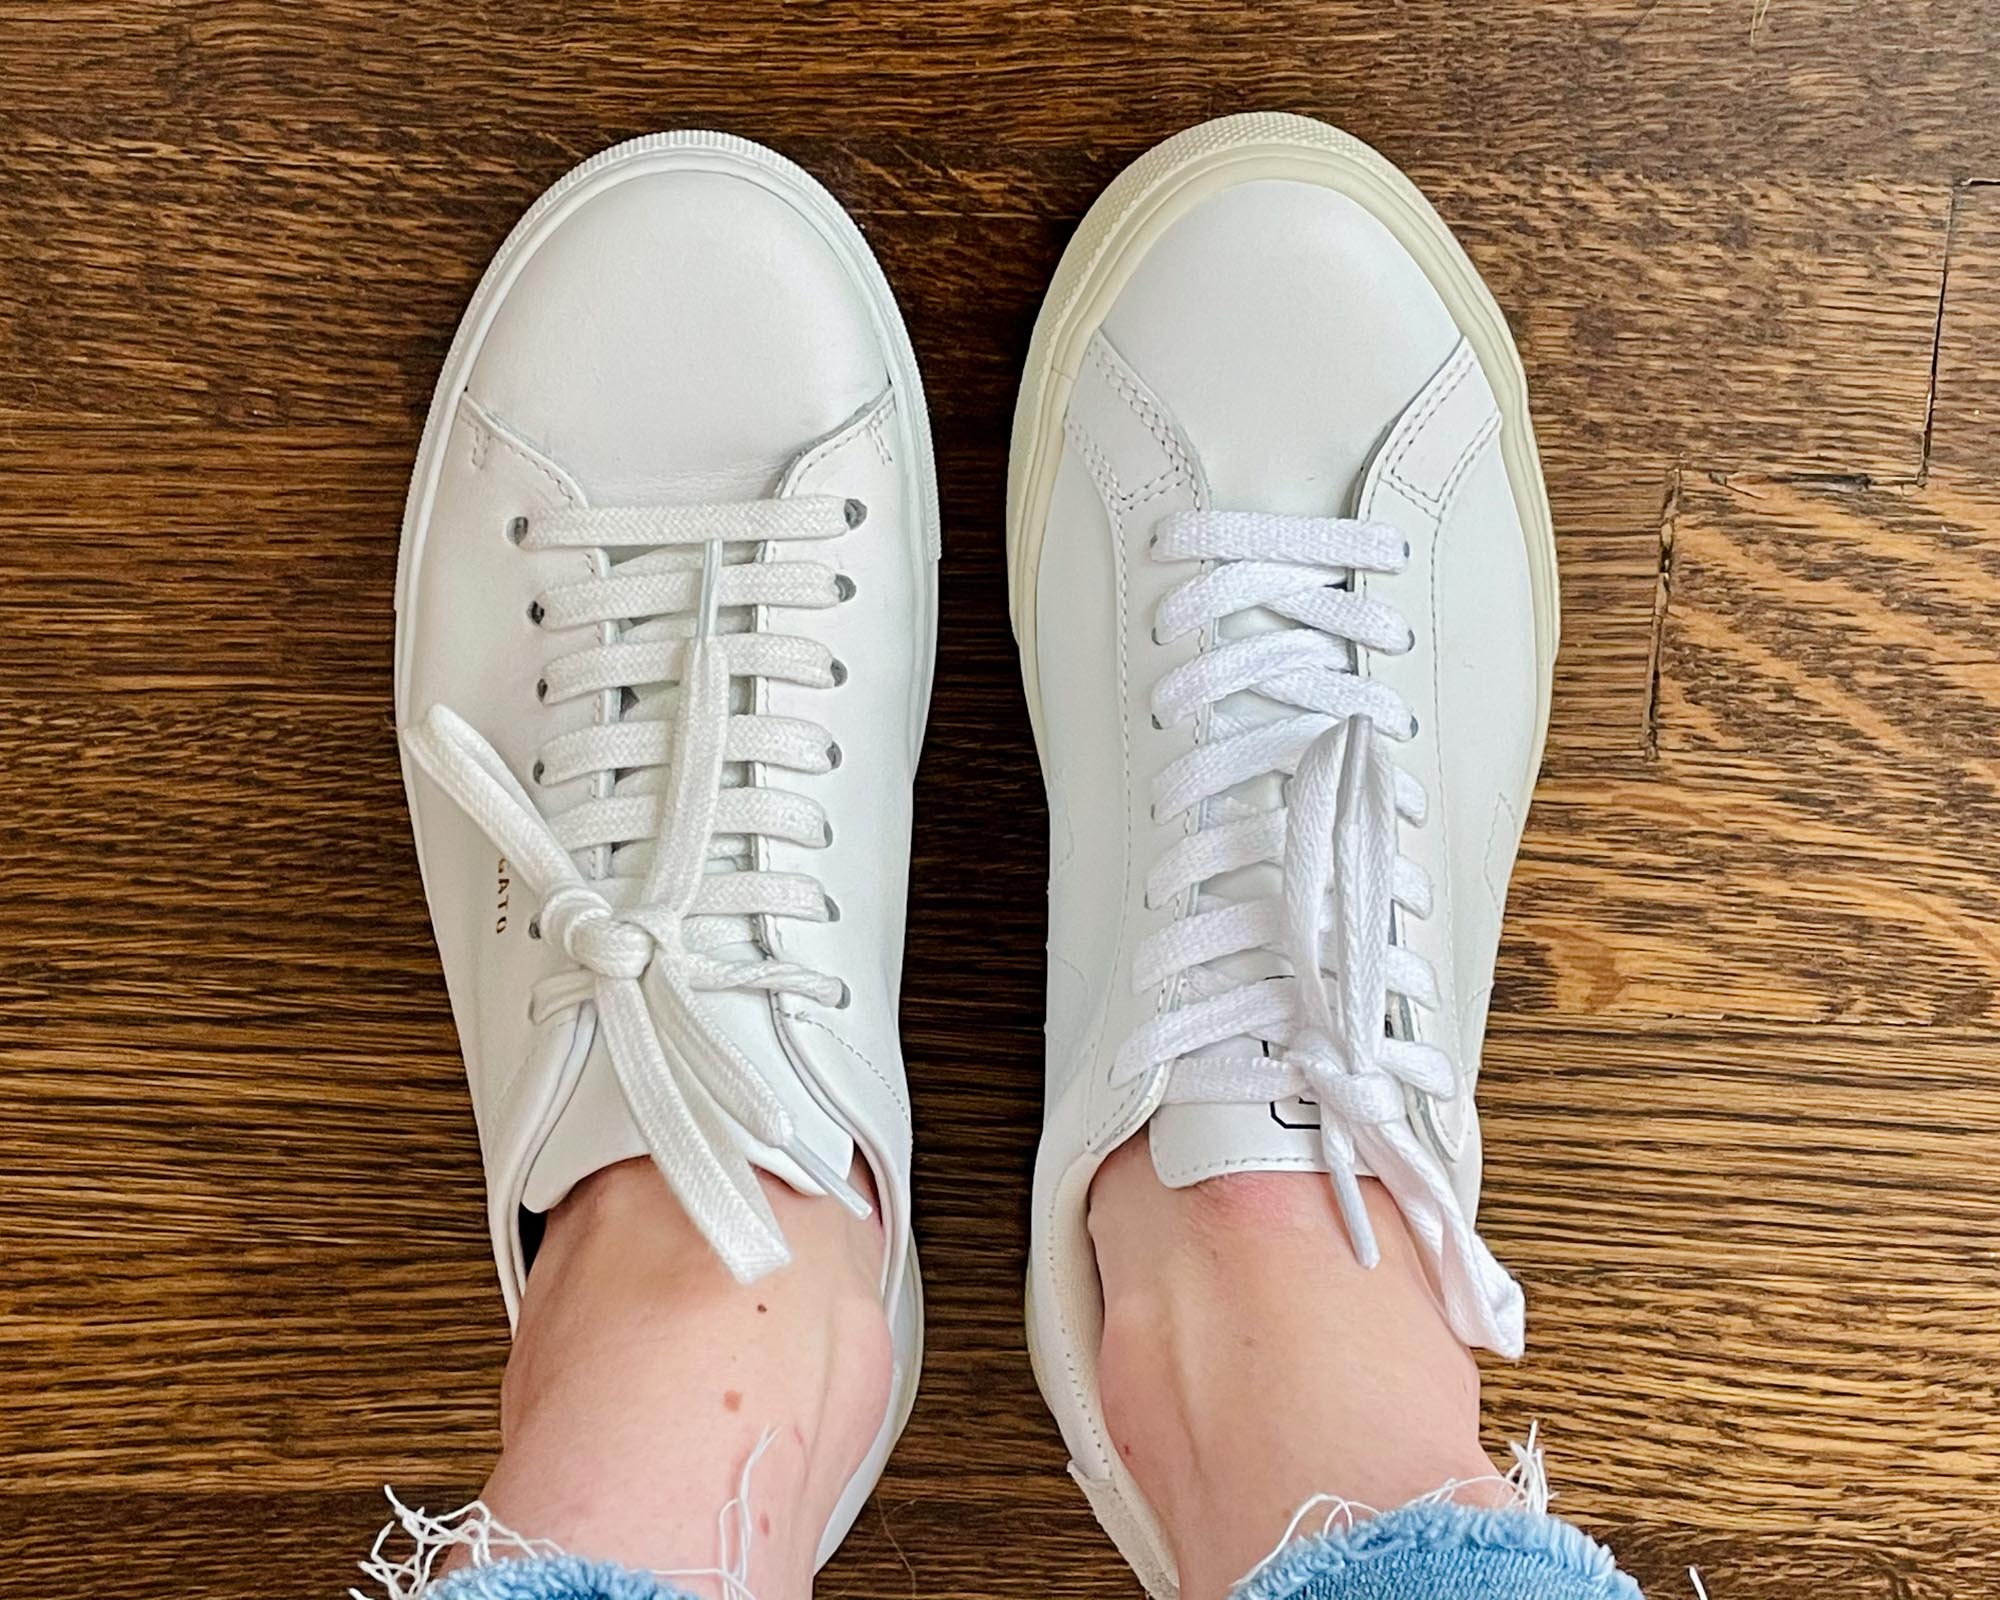 Side by side comparison of the Axel Arigato Clean 90s sneaker and the Veja Espalar sneaker.